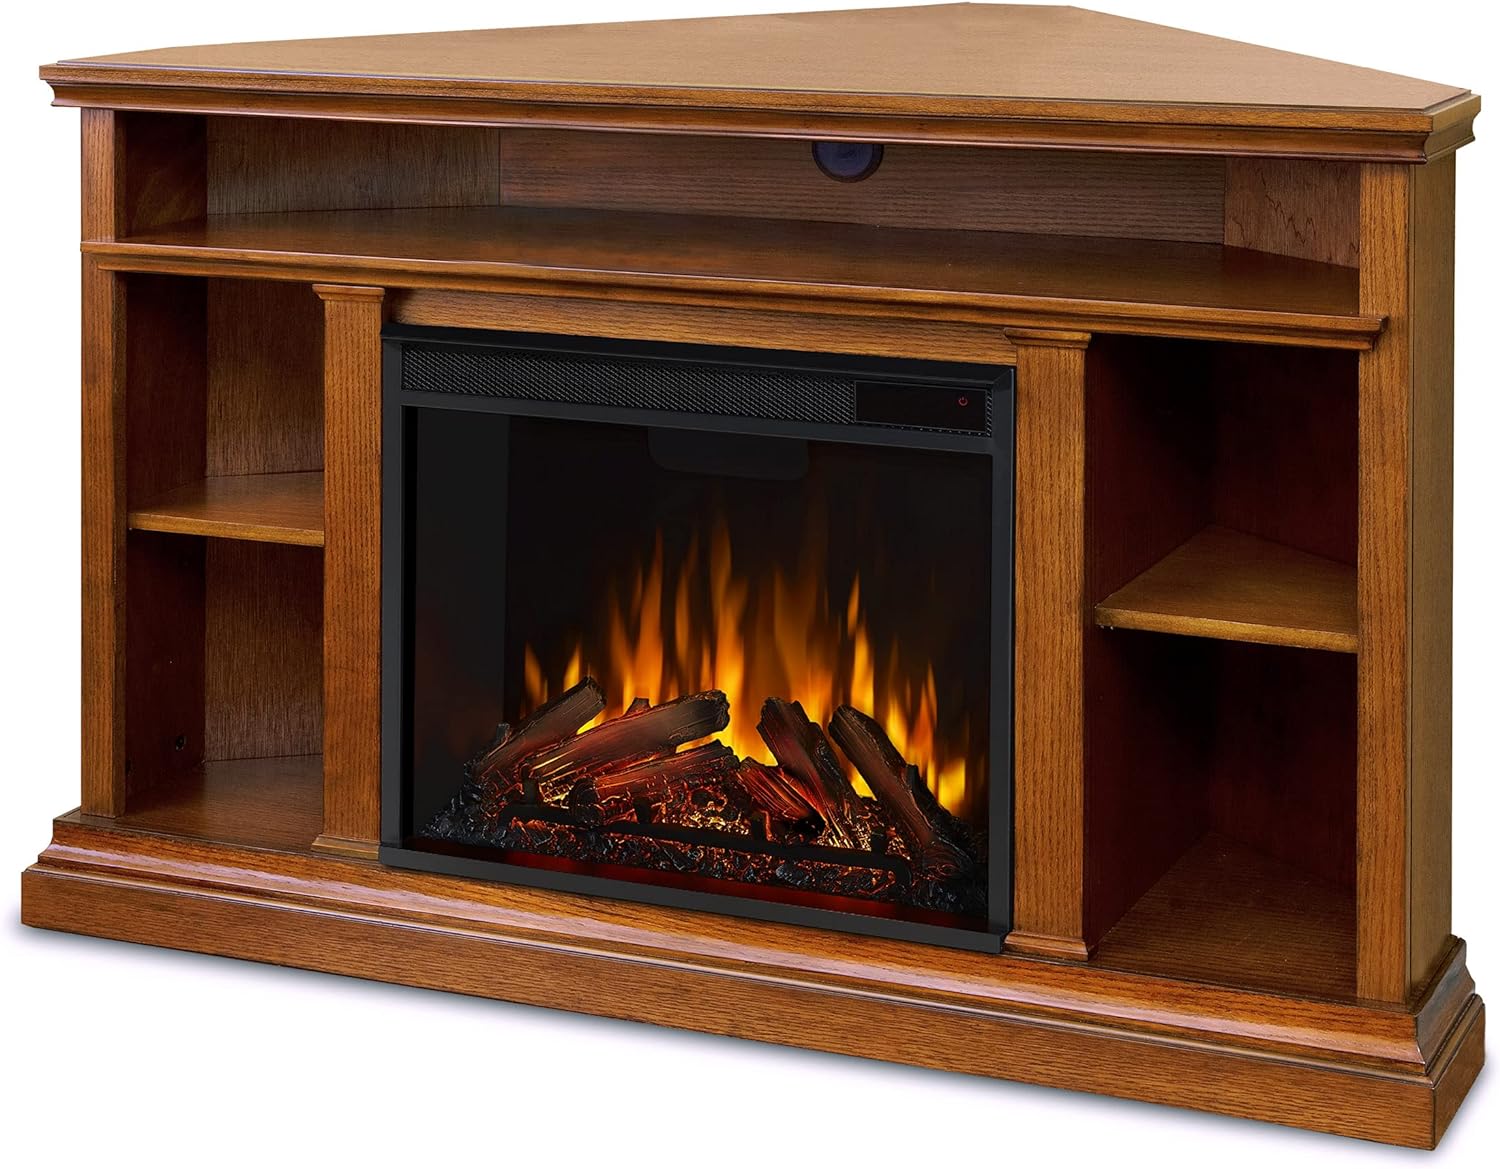 Real Flame Store Churchill Electric Fireplace in Oak by Real Flame